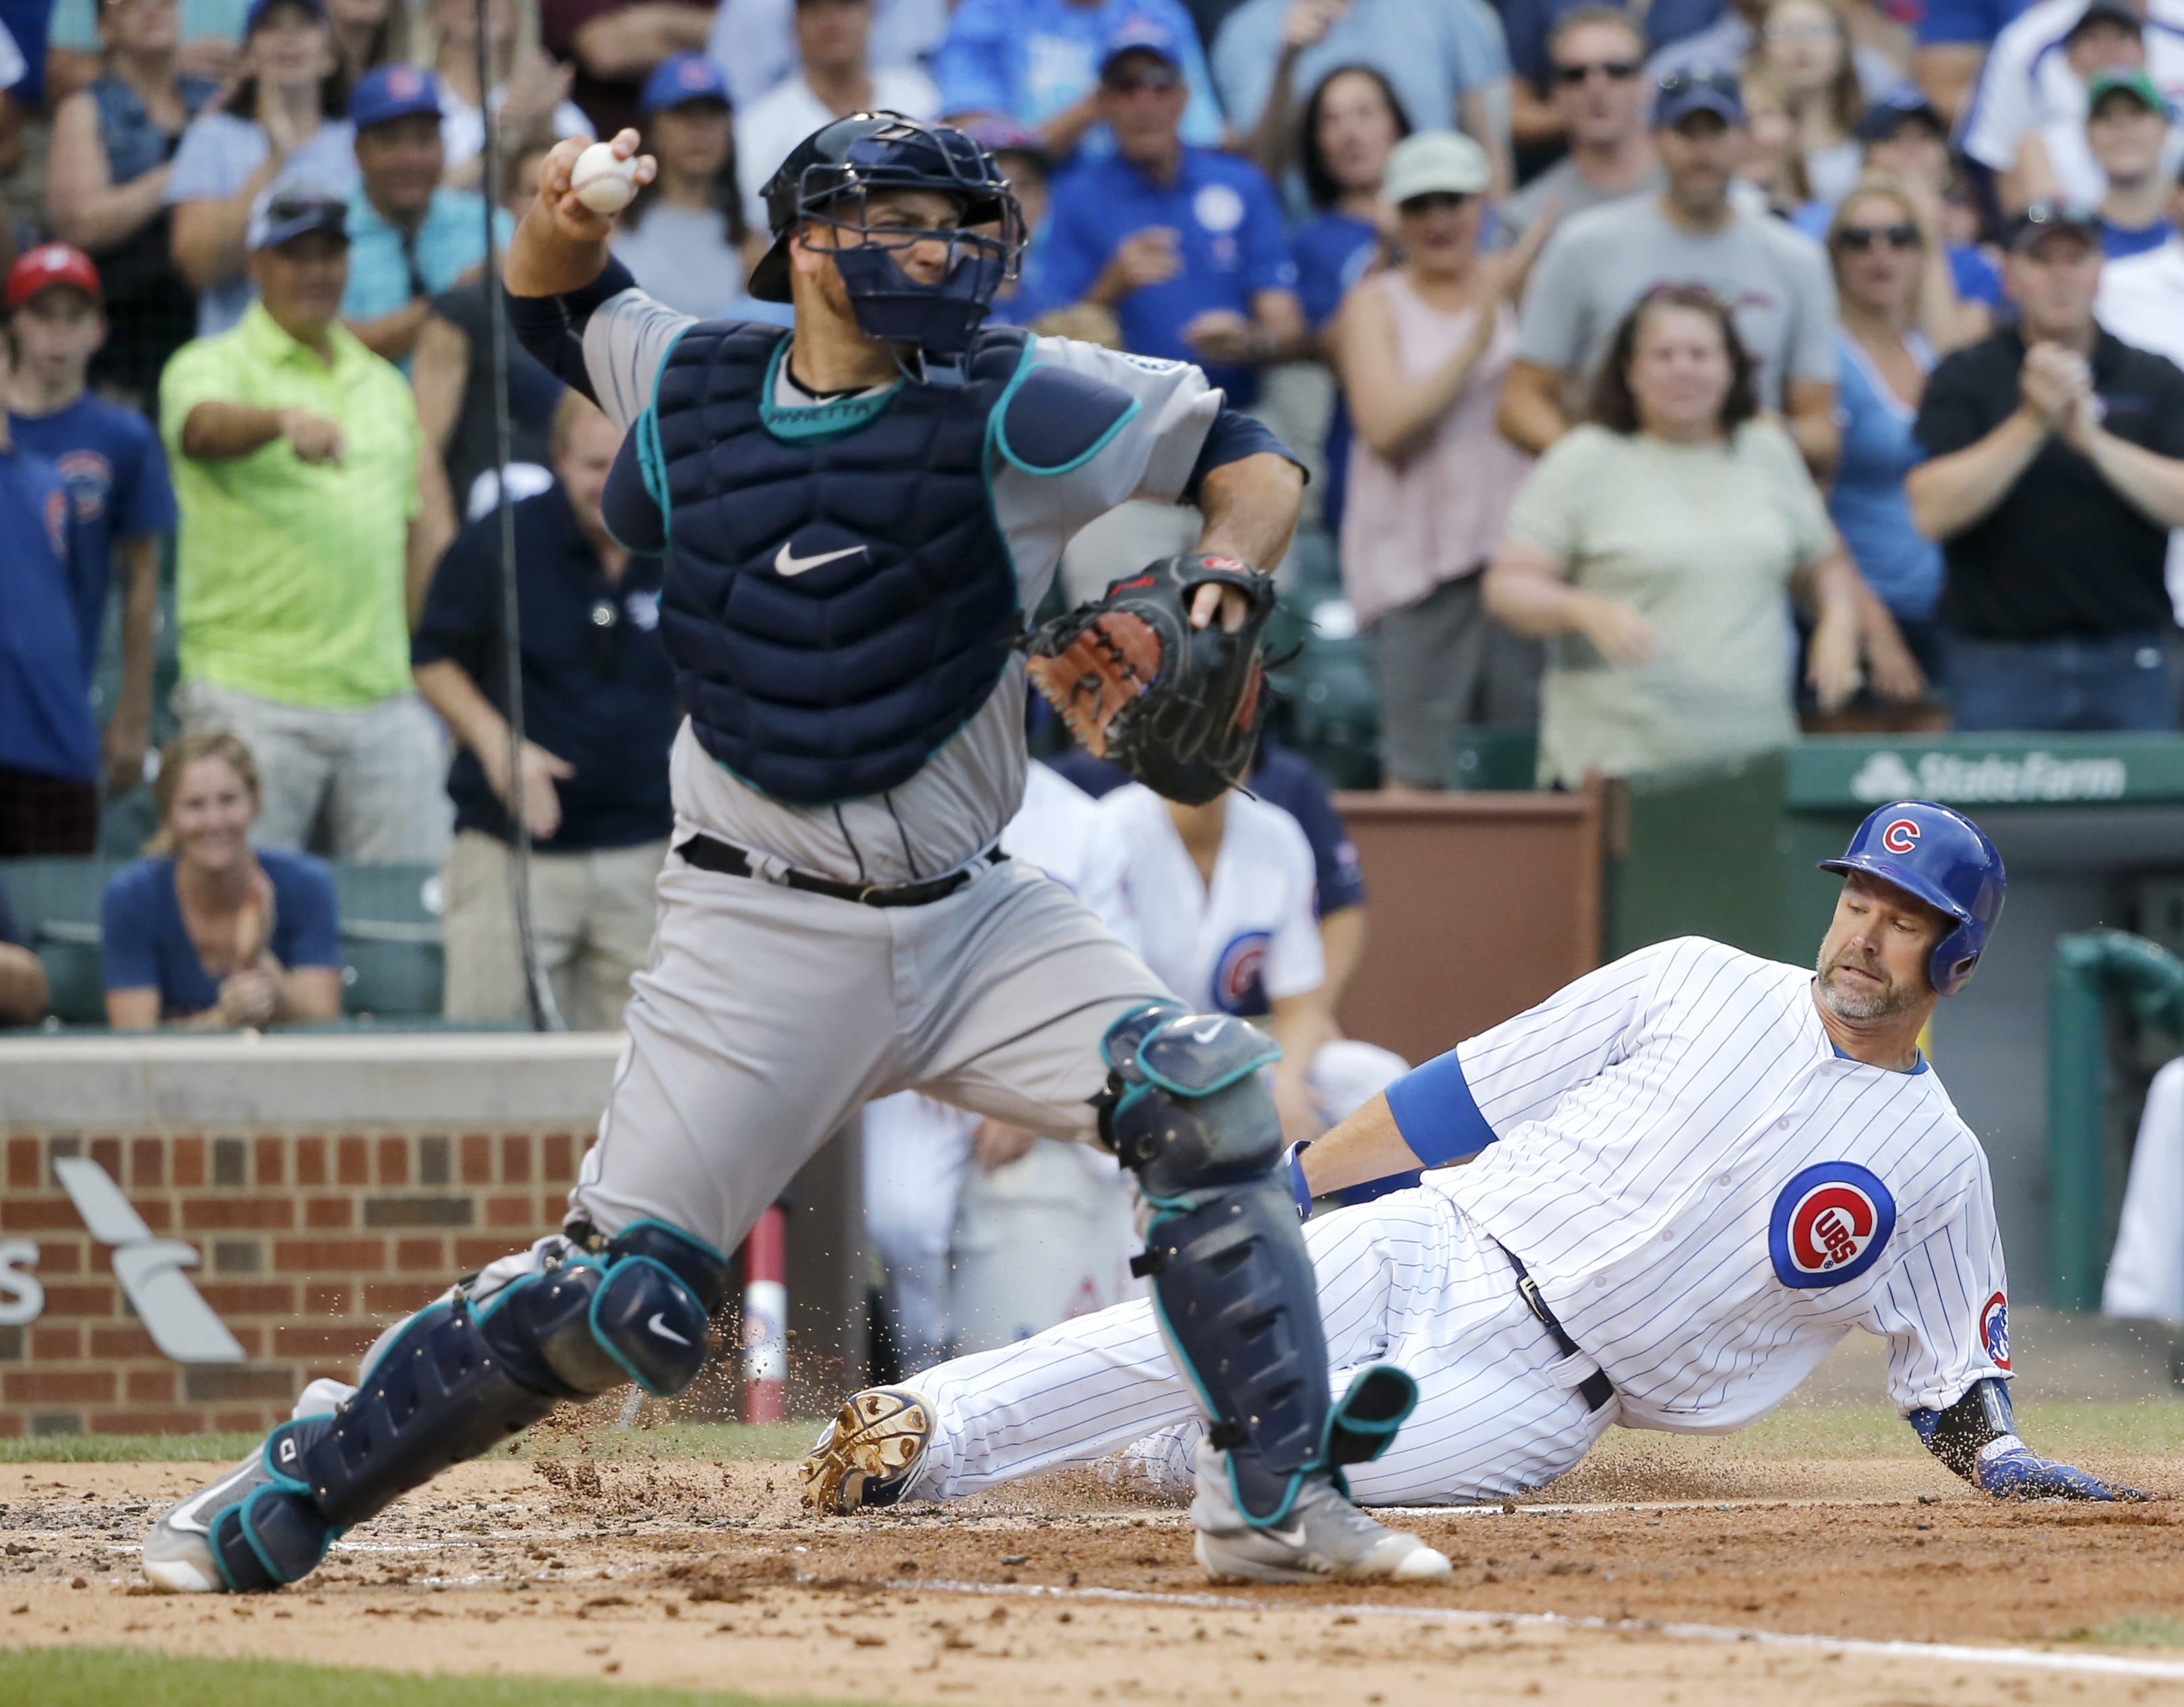 Chicago Cubs' David Ross, right, scores past Seattle Mariners catcher Chris Iannetta on a single by Chris Coghlan as Iannetta tries to get Chris Coghlan at second during the second inning of a baseball game Friday, July 29, 2016, in Chicago. Javier Baez also scored on the play.